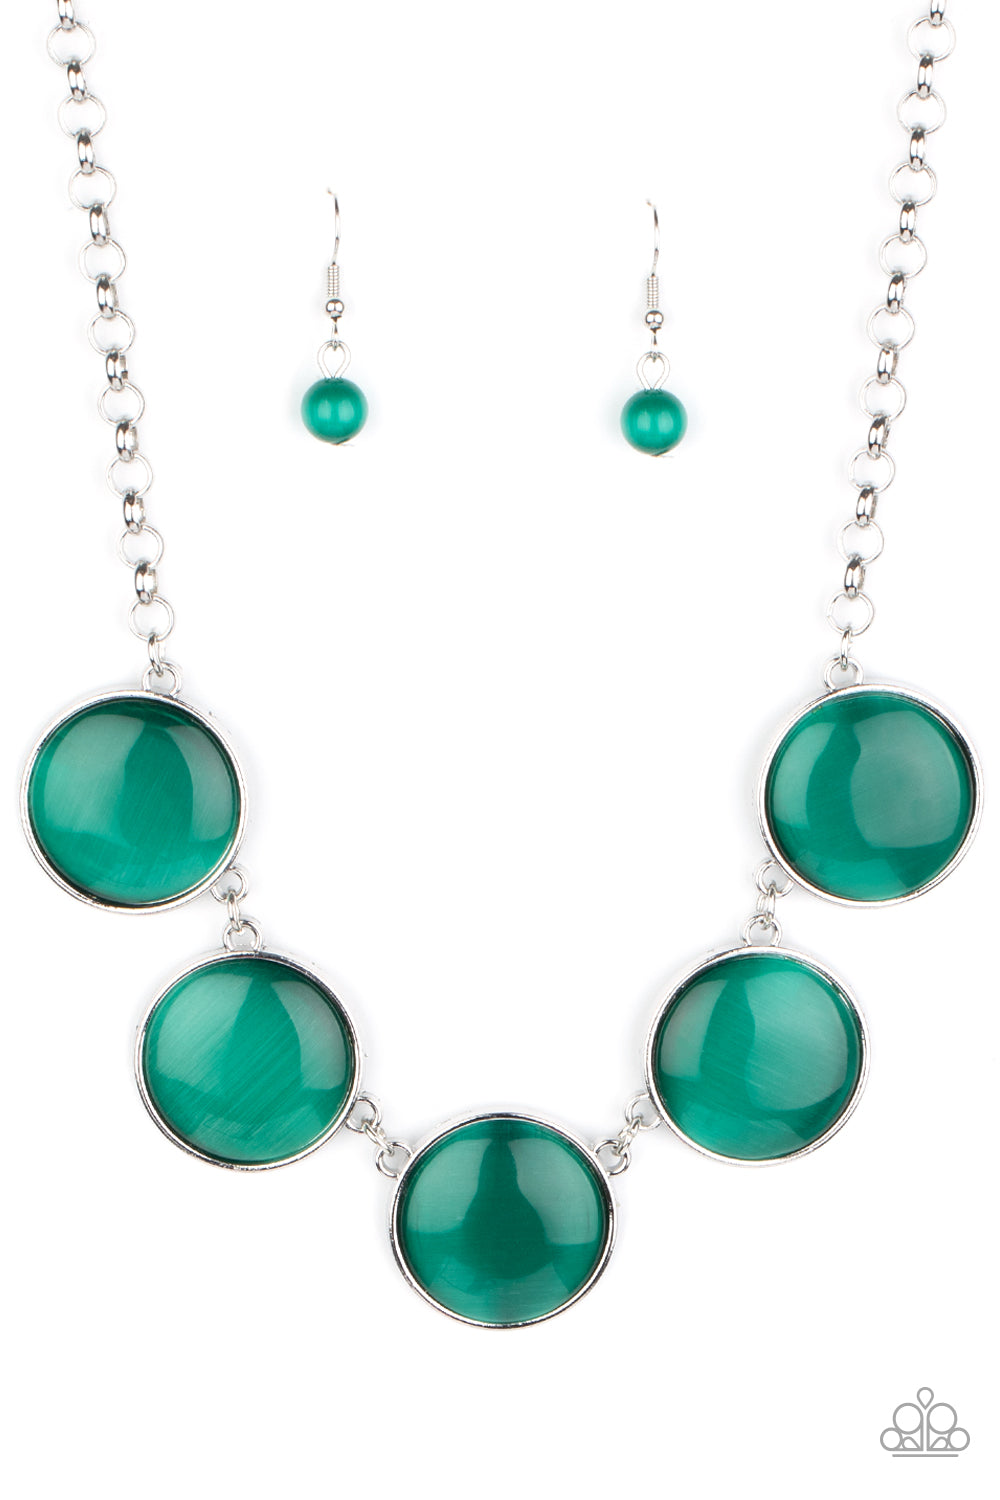 Ethereal Escape - Green Paparazzi Jewelry